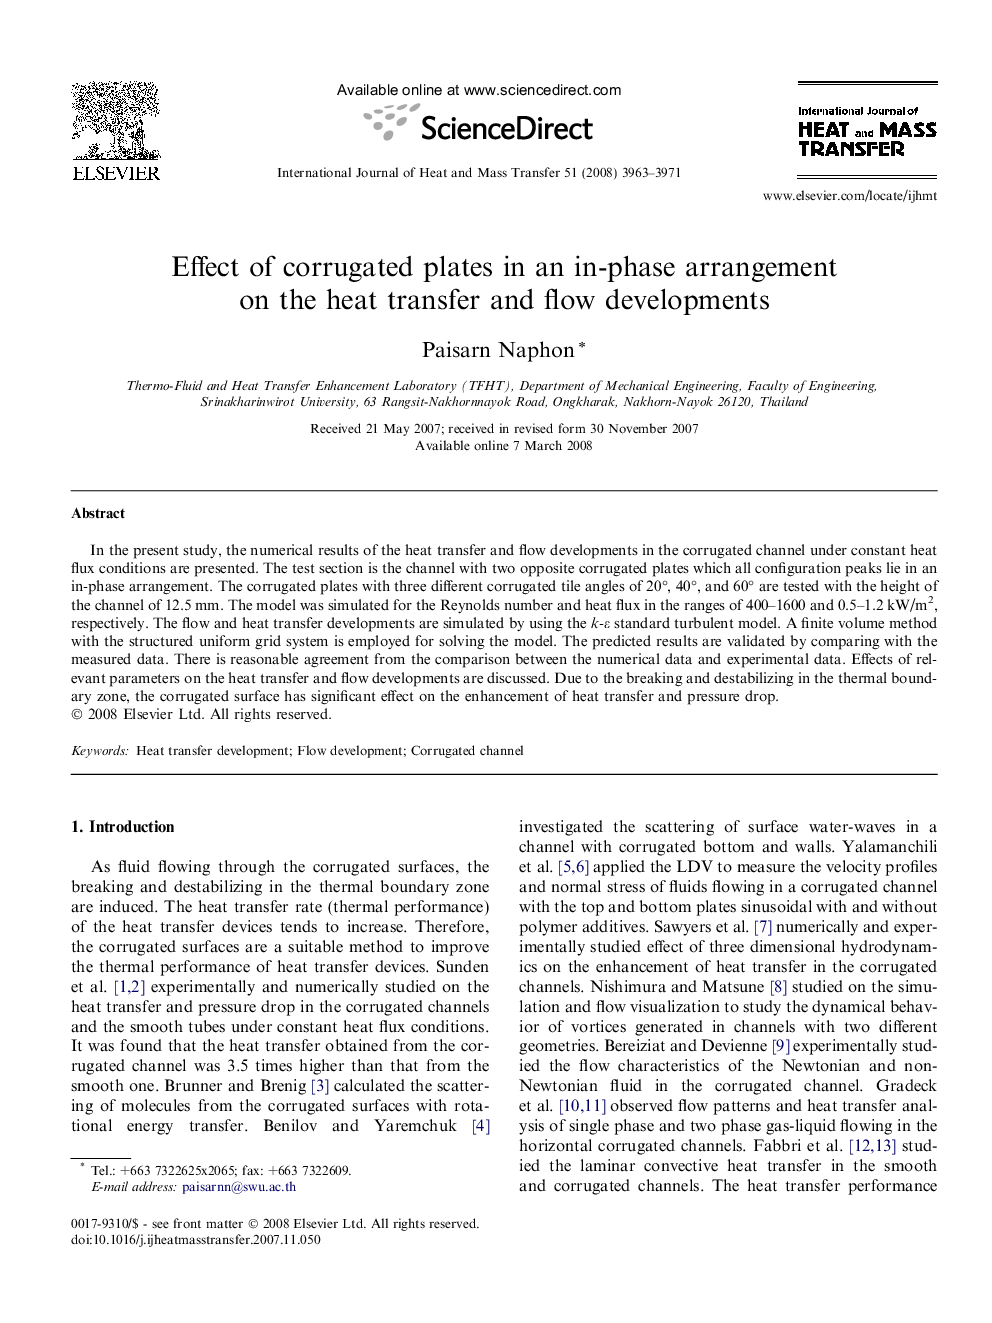 Effect of corrugated plates in an in-phase arrangement on the heat transfer and flow developments